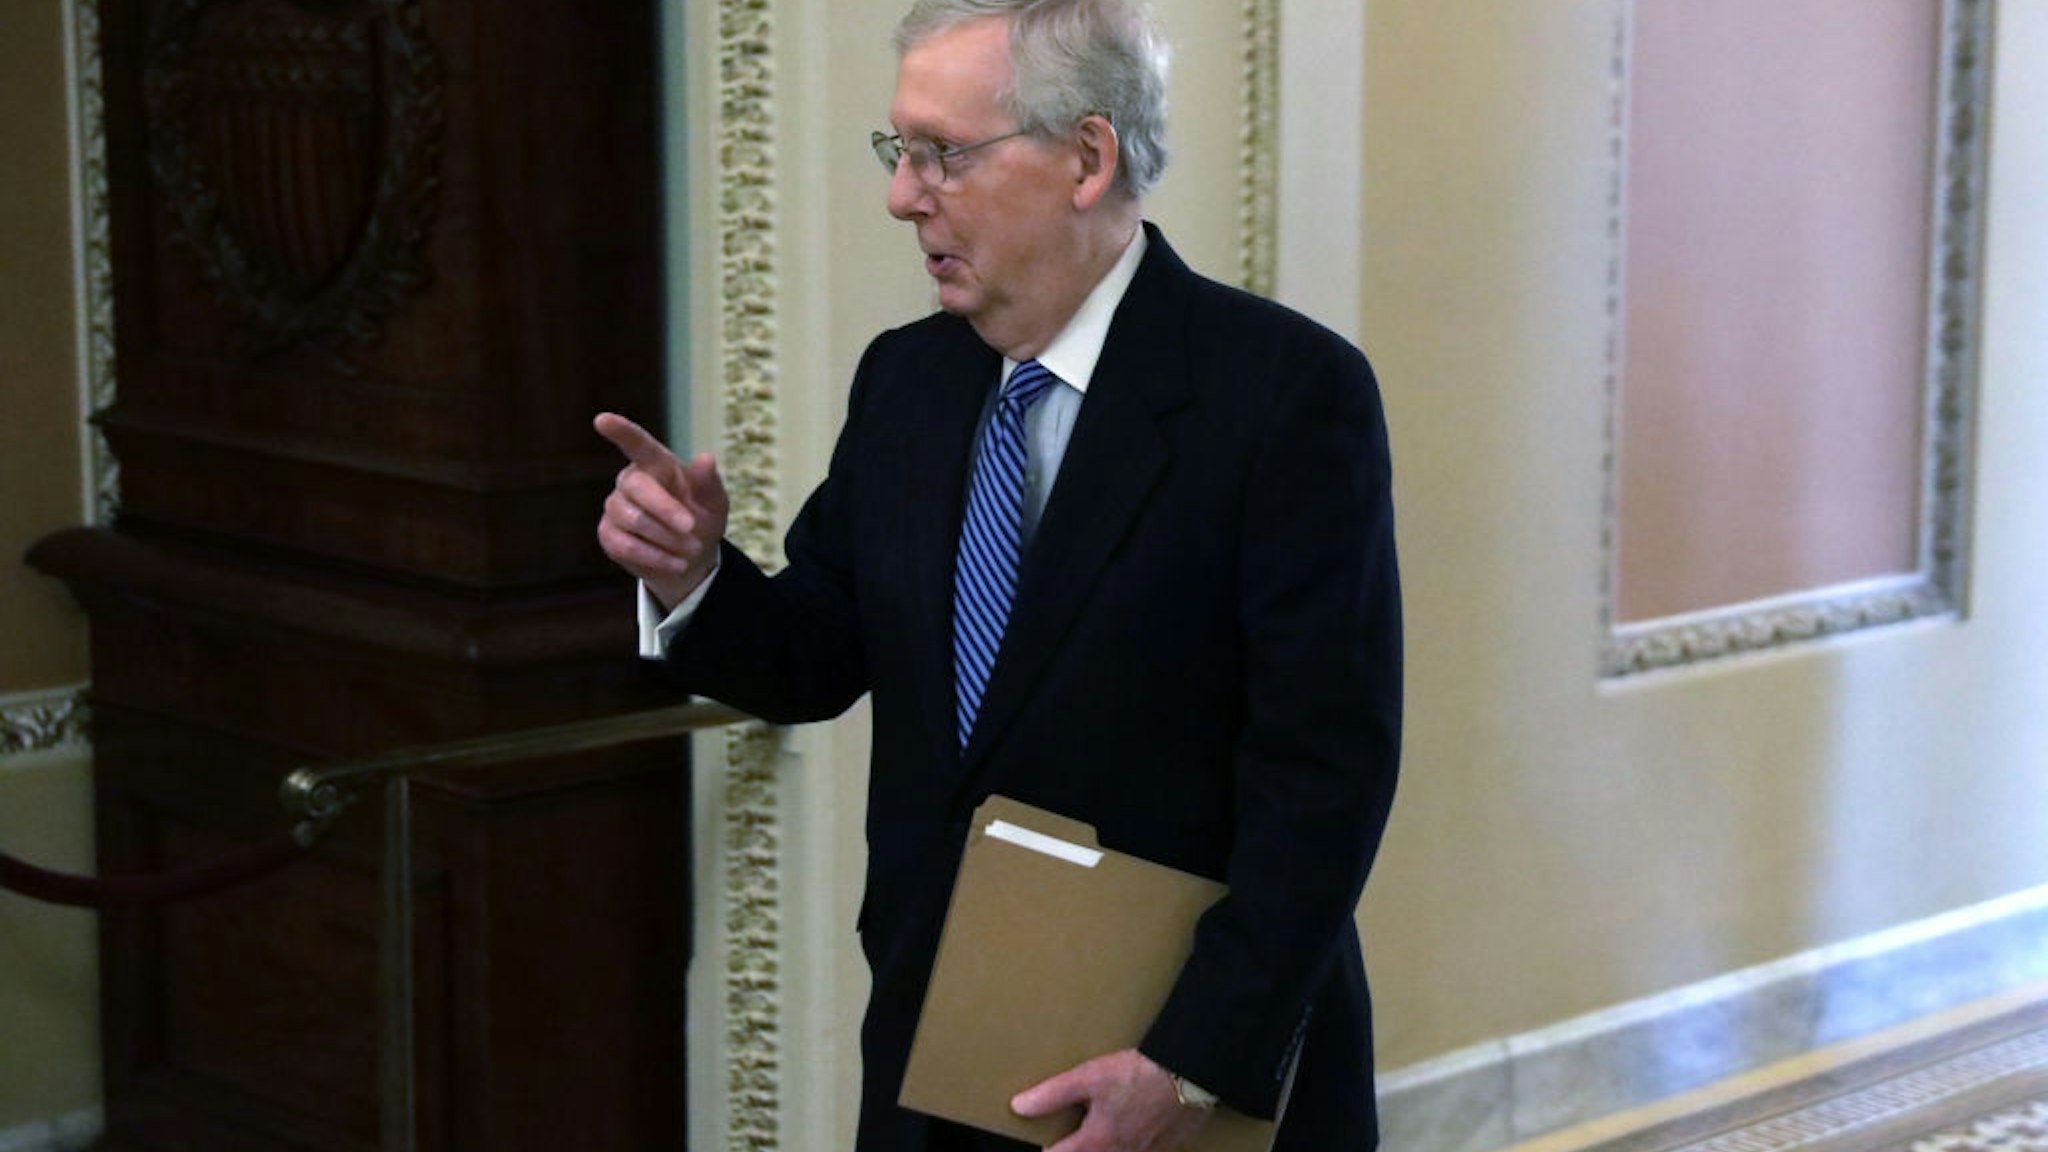 U.S. Senate Majority Leader Sen. Mitch McConnell (R-KY) walks towards the Senate chamber at the U.S. Capitol March 23, 2020 in Washington, DC.